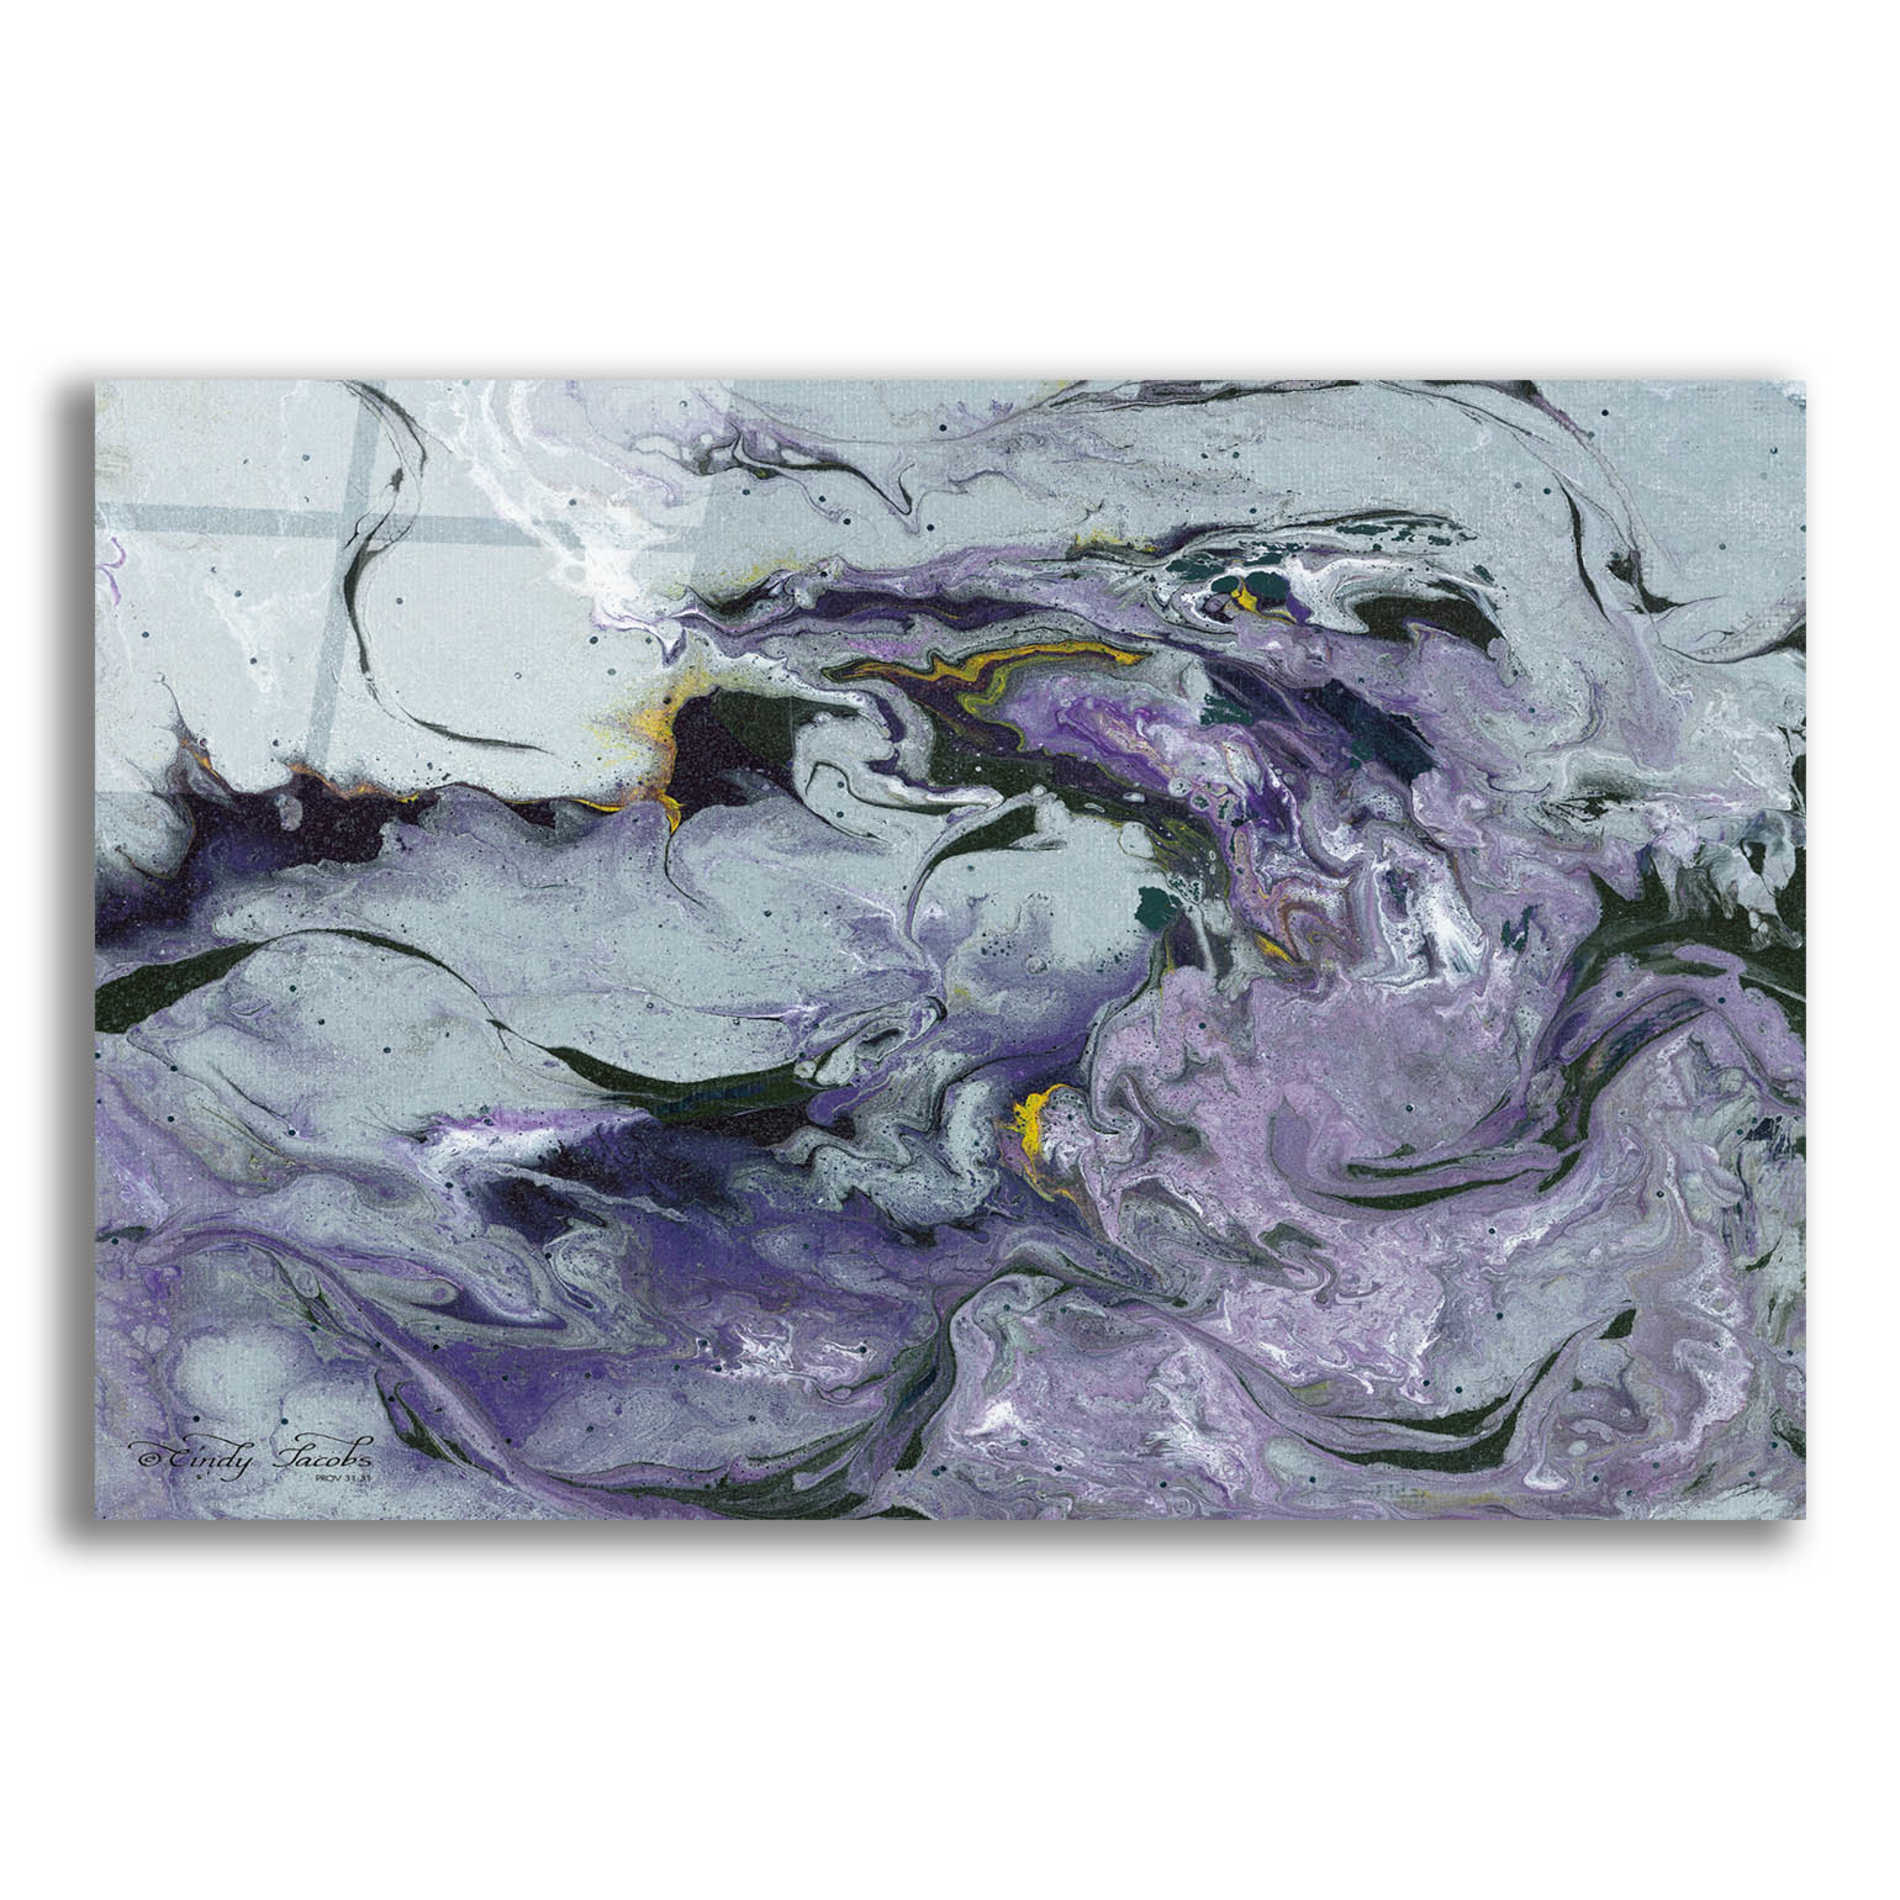 Epic Art 'Abstract in Purple IV' by Cindy Jacobs, Acrylic Glass Wall Art,24x16